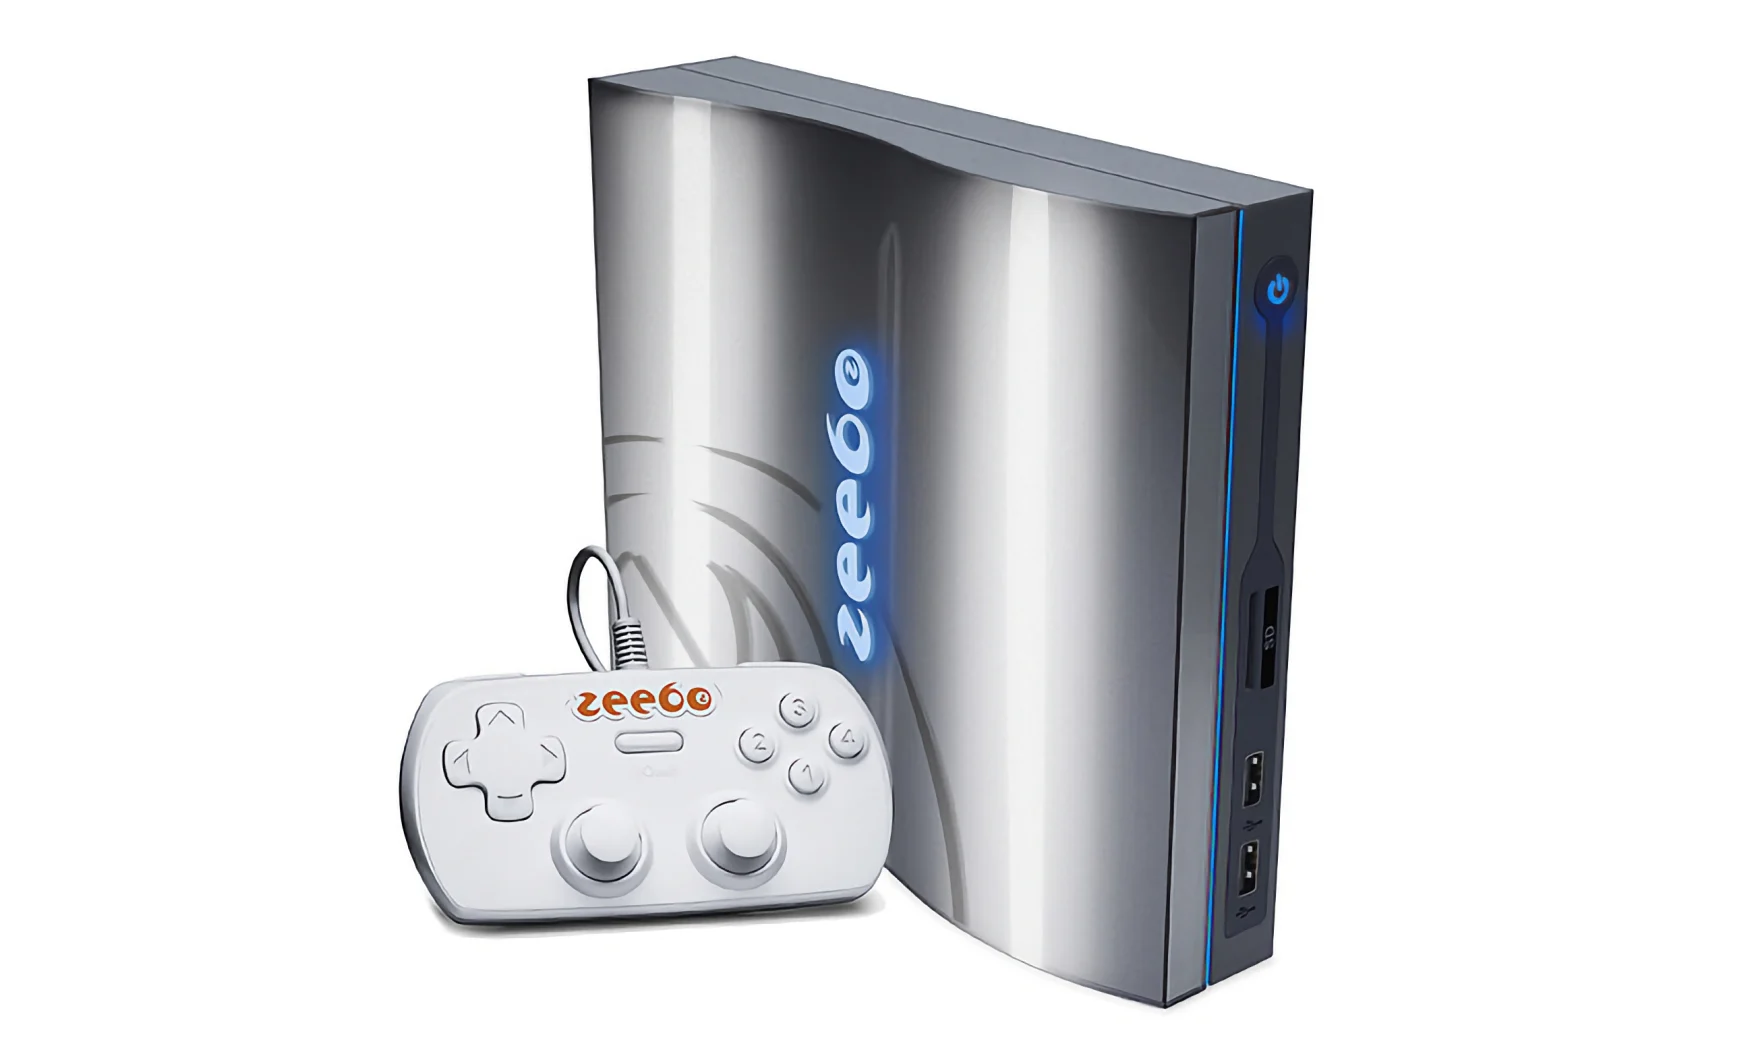 Archival marketing image of the Zeebo gaming console. The dark gray console has curves and somewhat resembles a PS3 Slim. Its controller is white and rectangular with an orange 